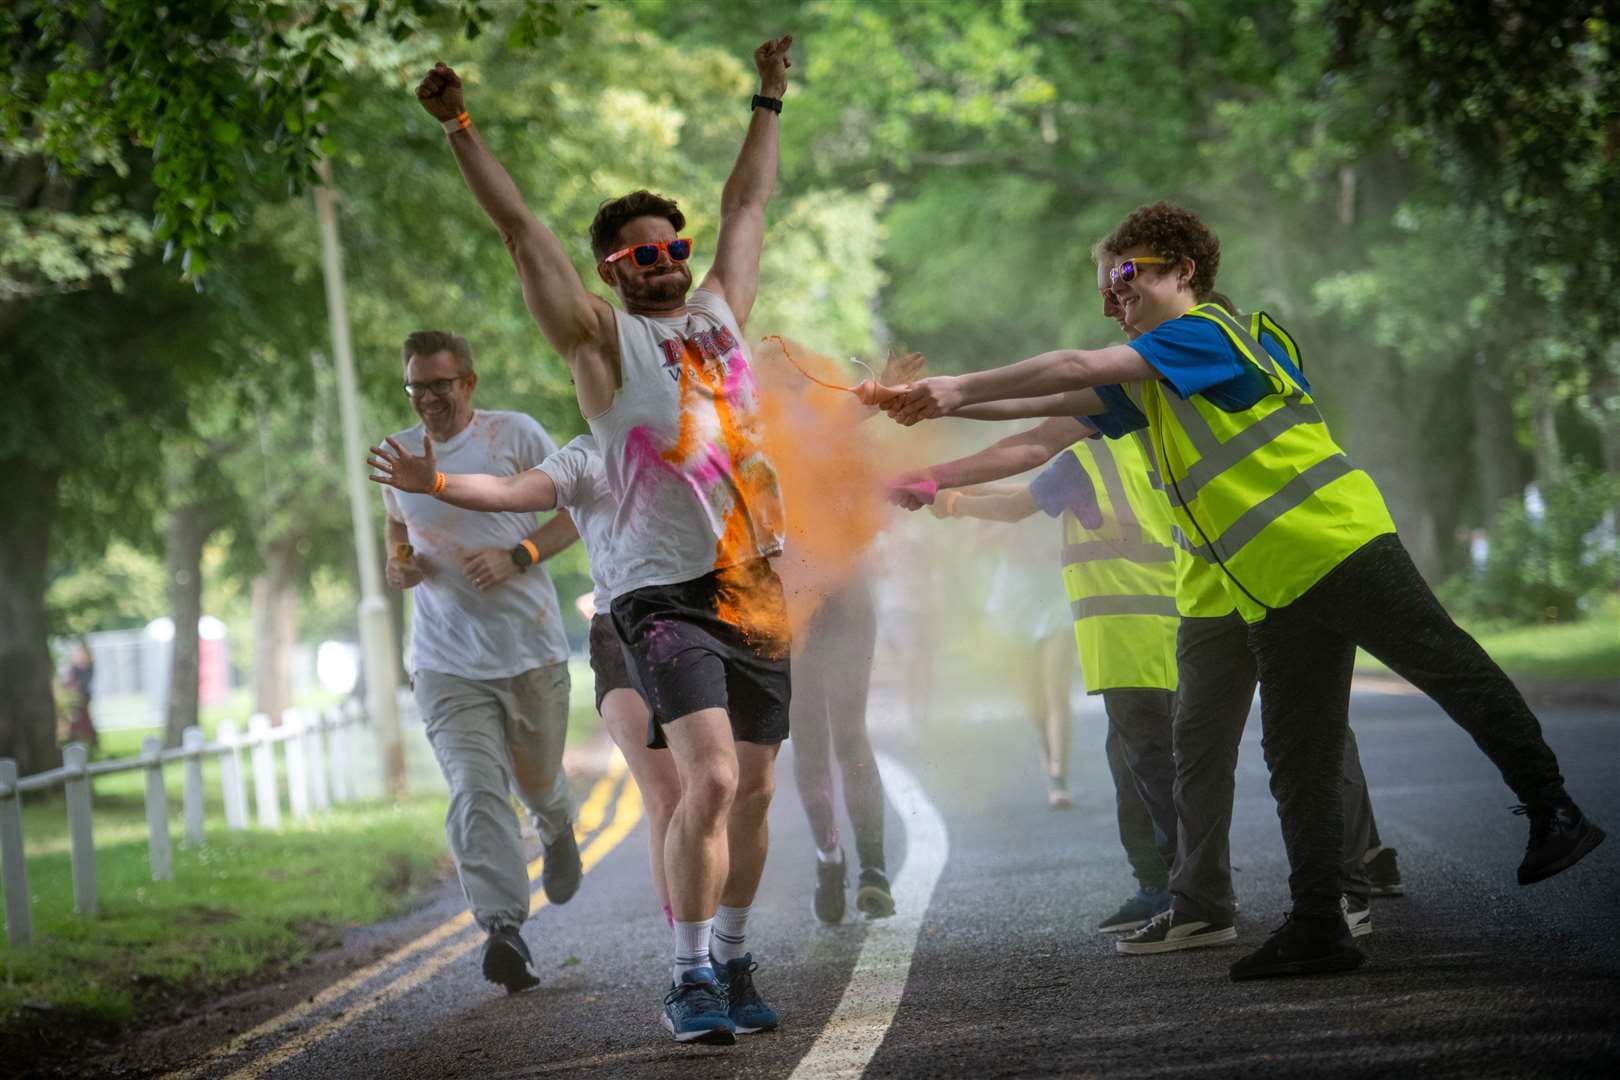 The Colour Fun Run was a first for the event. Picture: Callum Mackay